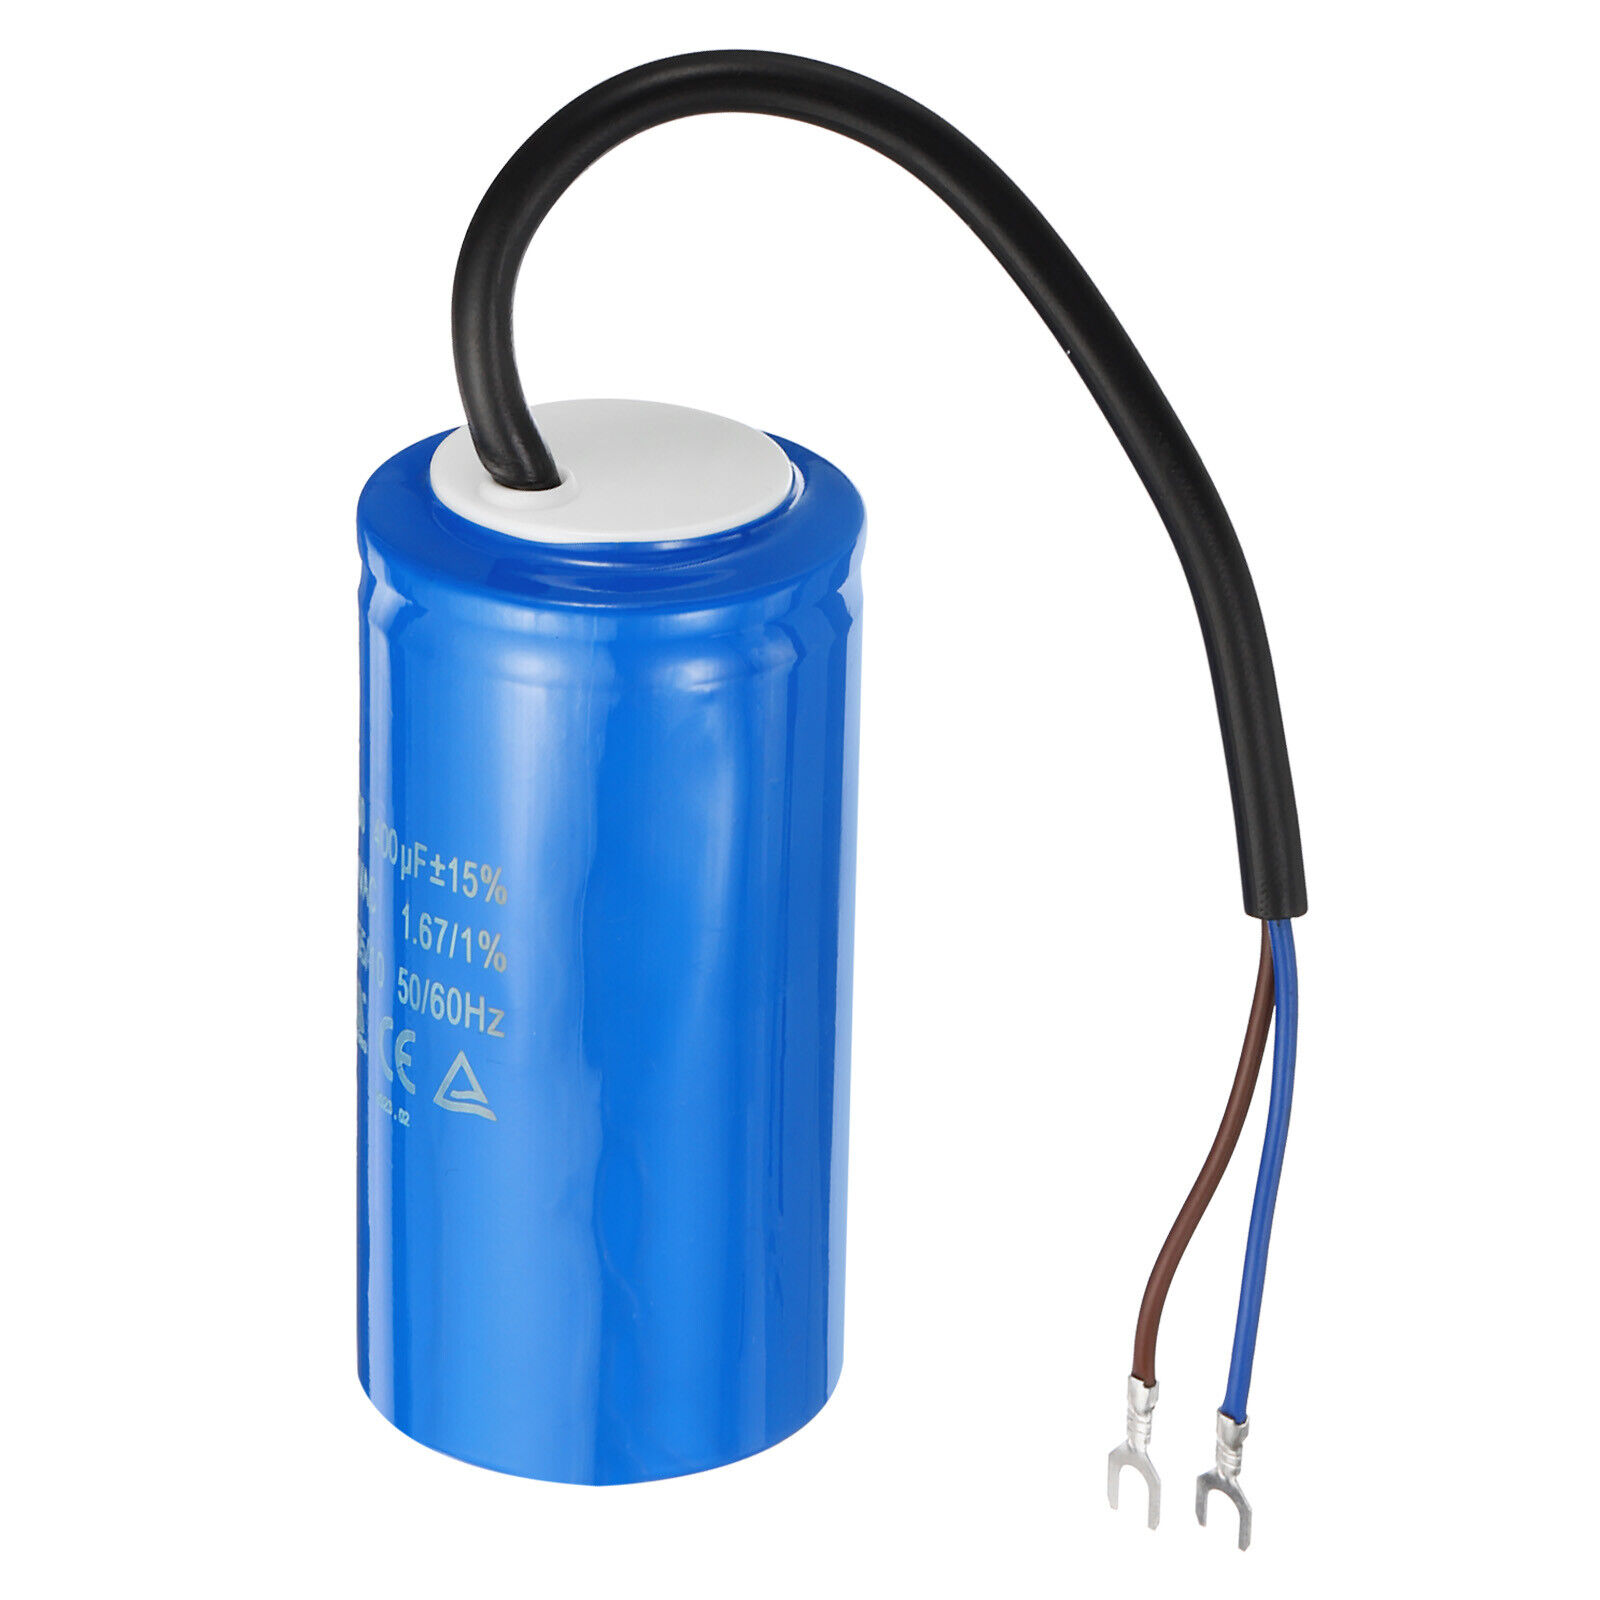 CD60 Run Capacitor 400uF 250VAC 50/60Hz Motor Starting Capacitor with 2 Wires